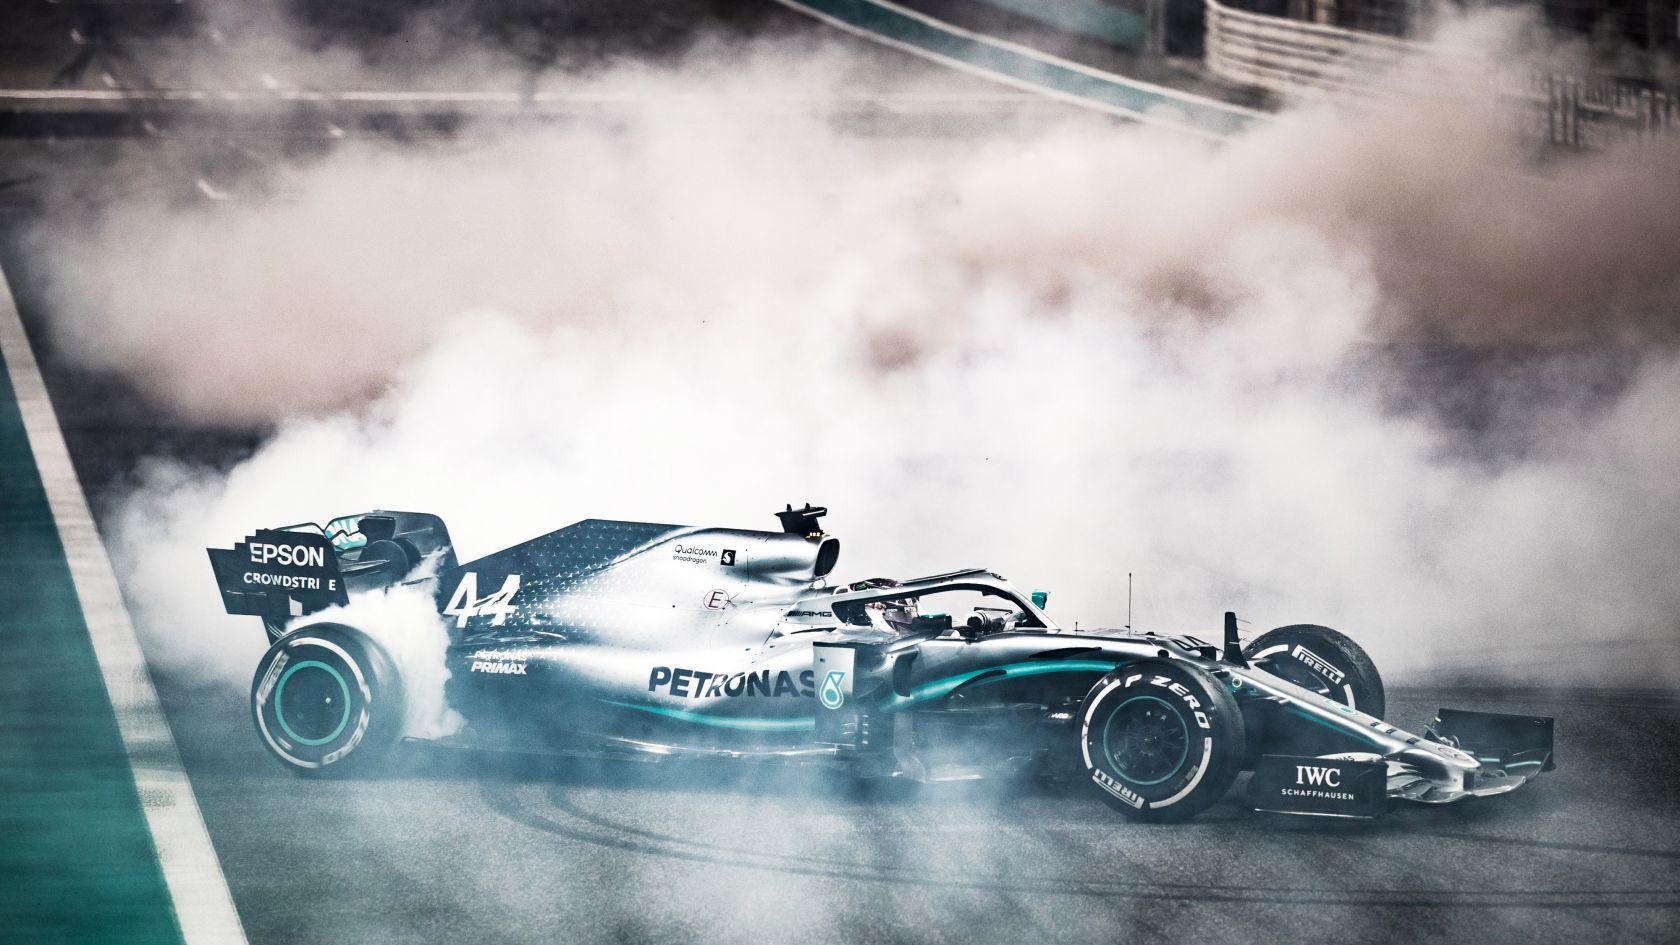 Mercedes W11 Wallpapers